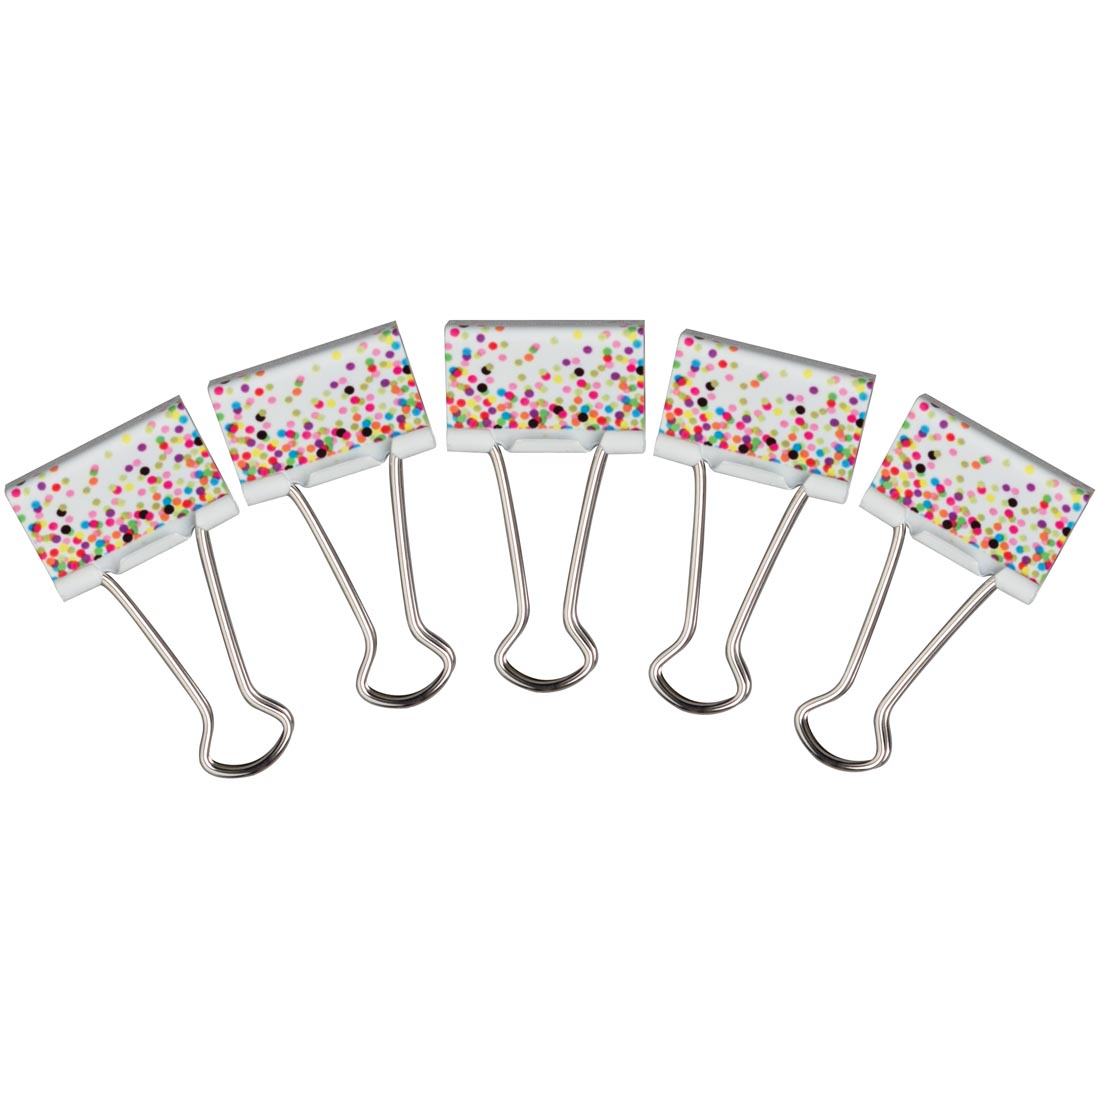 Five Binder Clips from the Confetti collection by Teacher Created Resources